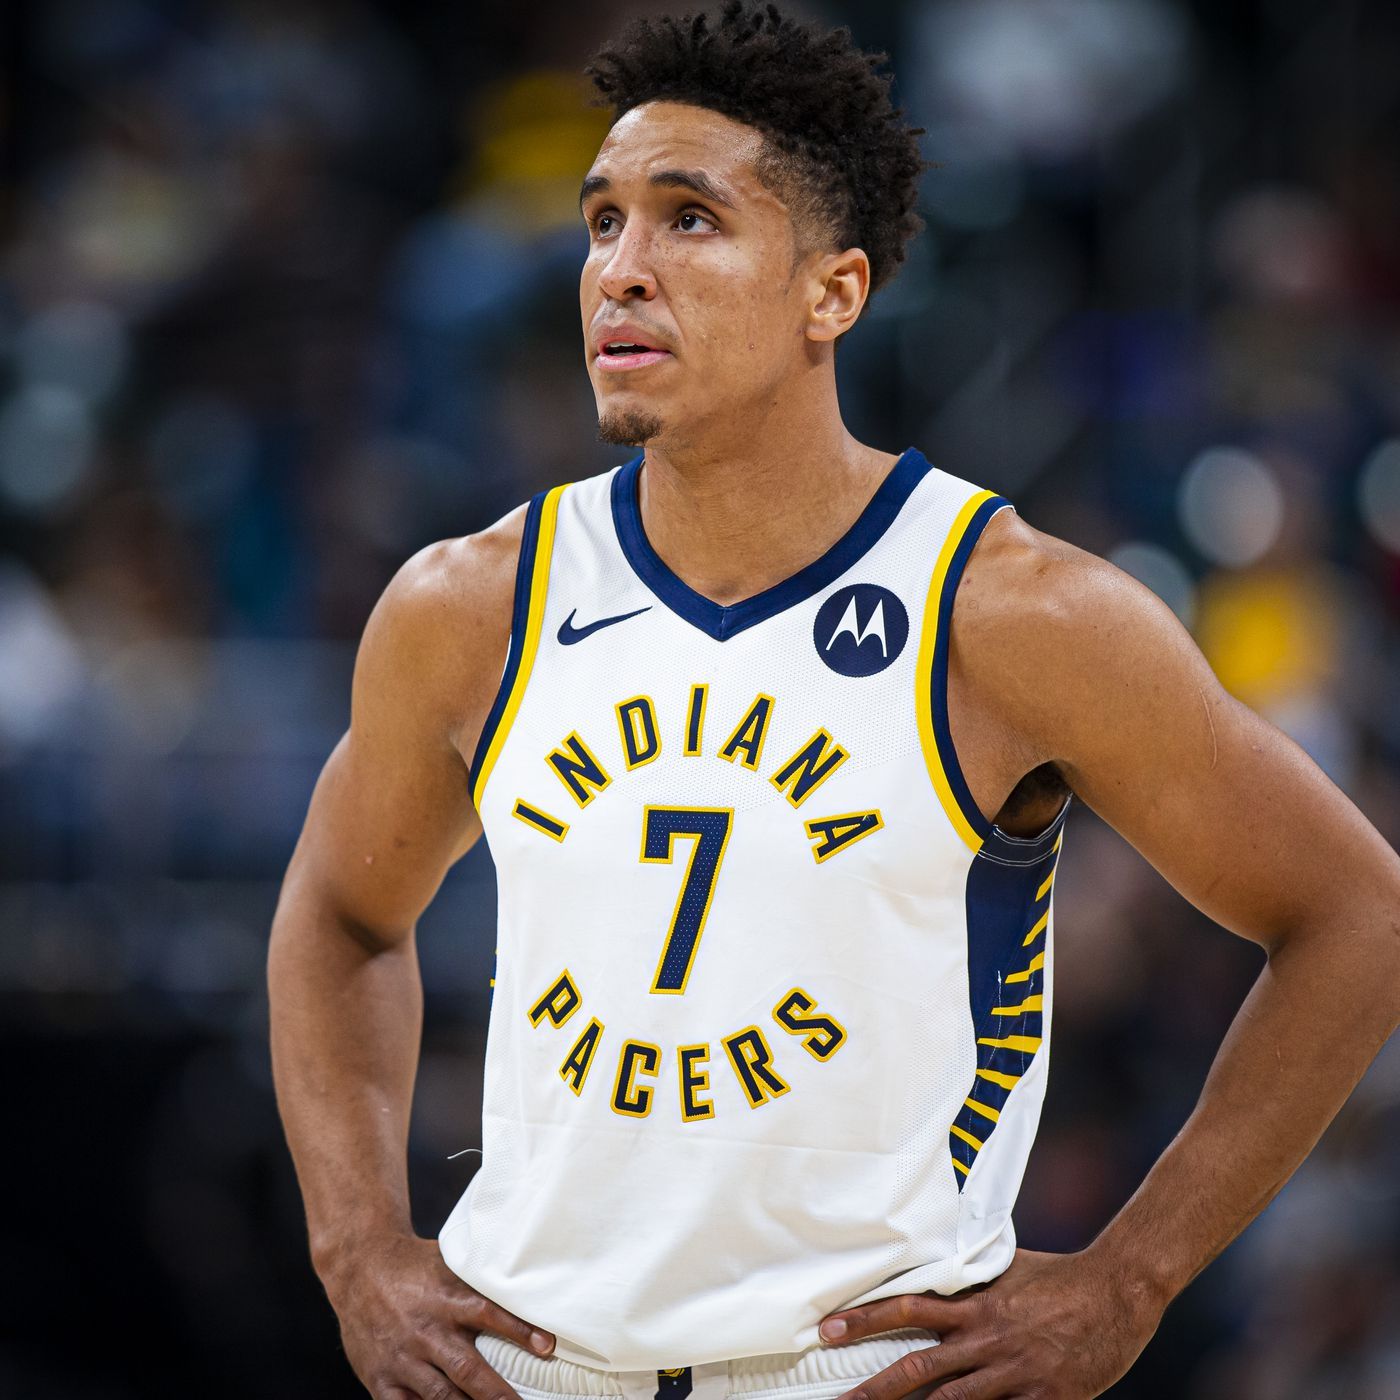 Malcolm Brogdon ruled out versus Warriors with concussion